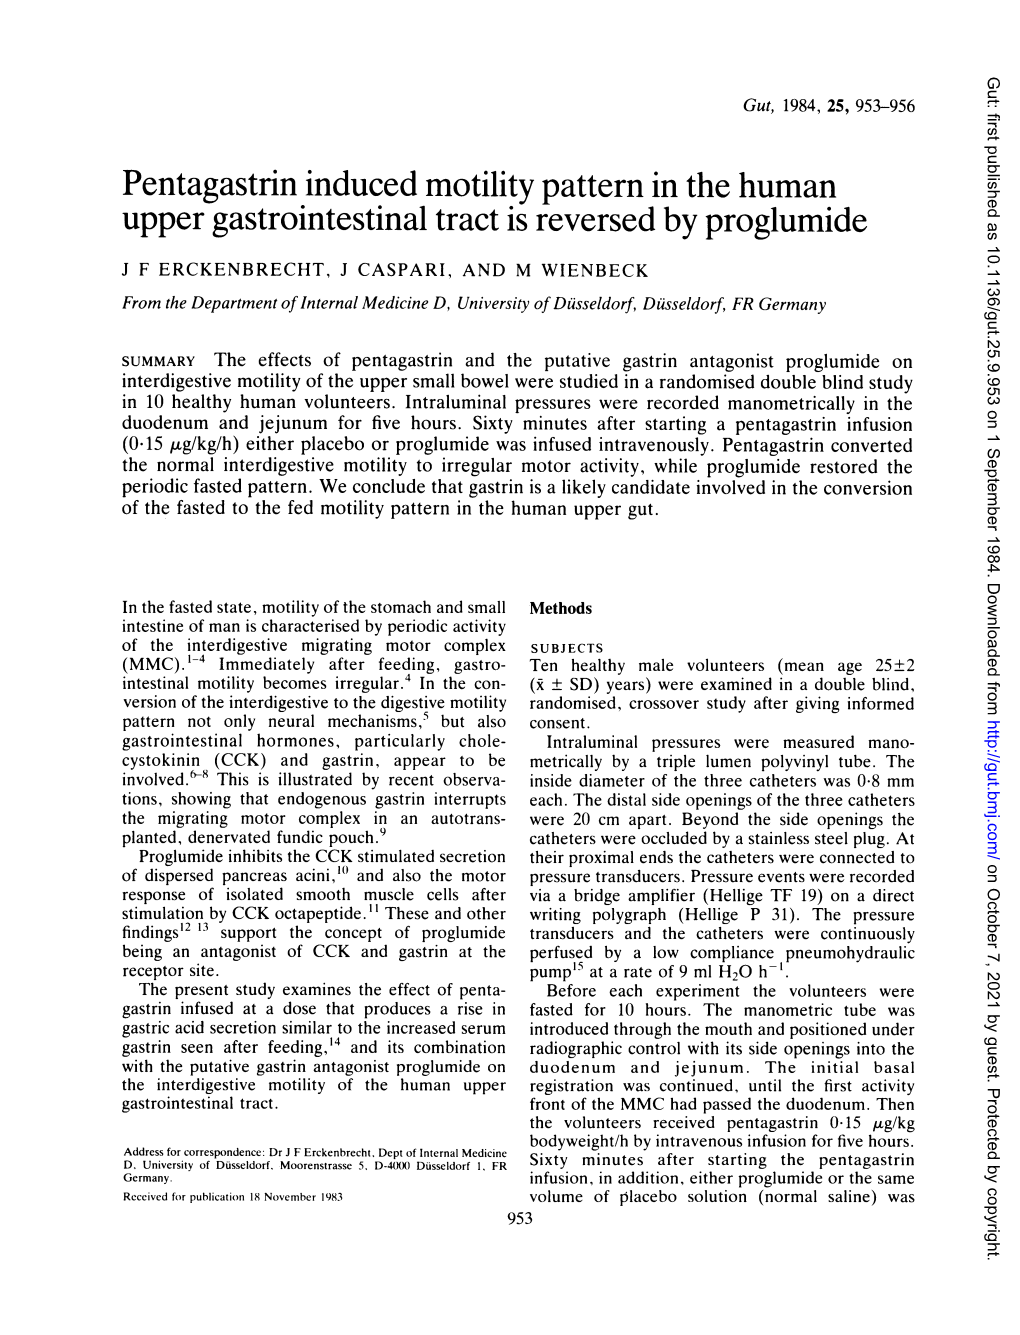 Pentagastrin Induced Motility Pattern in the Human Upper Gastrointestinal Tract Is Reversed by Proglumide